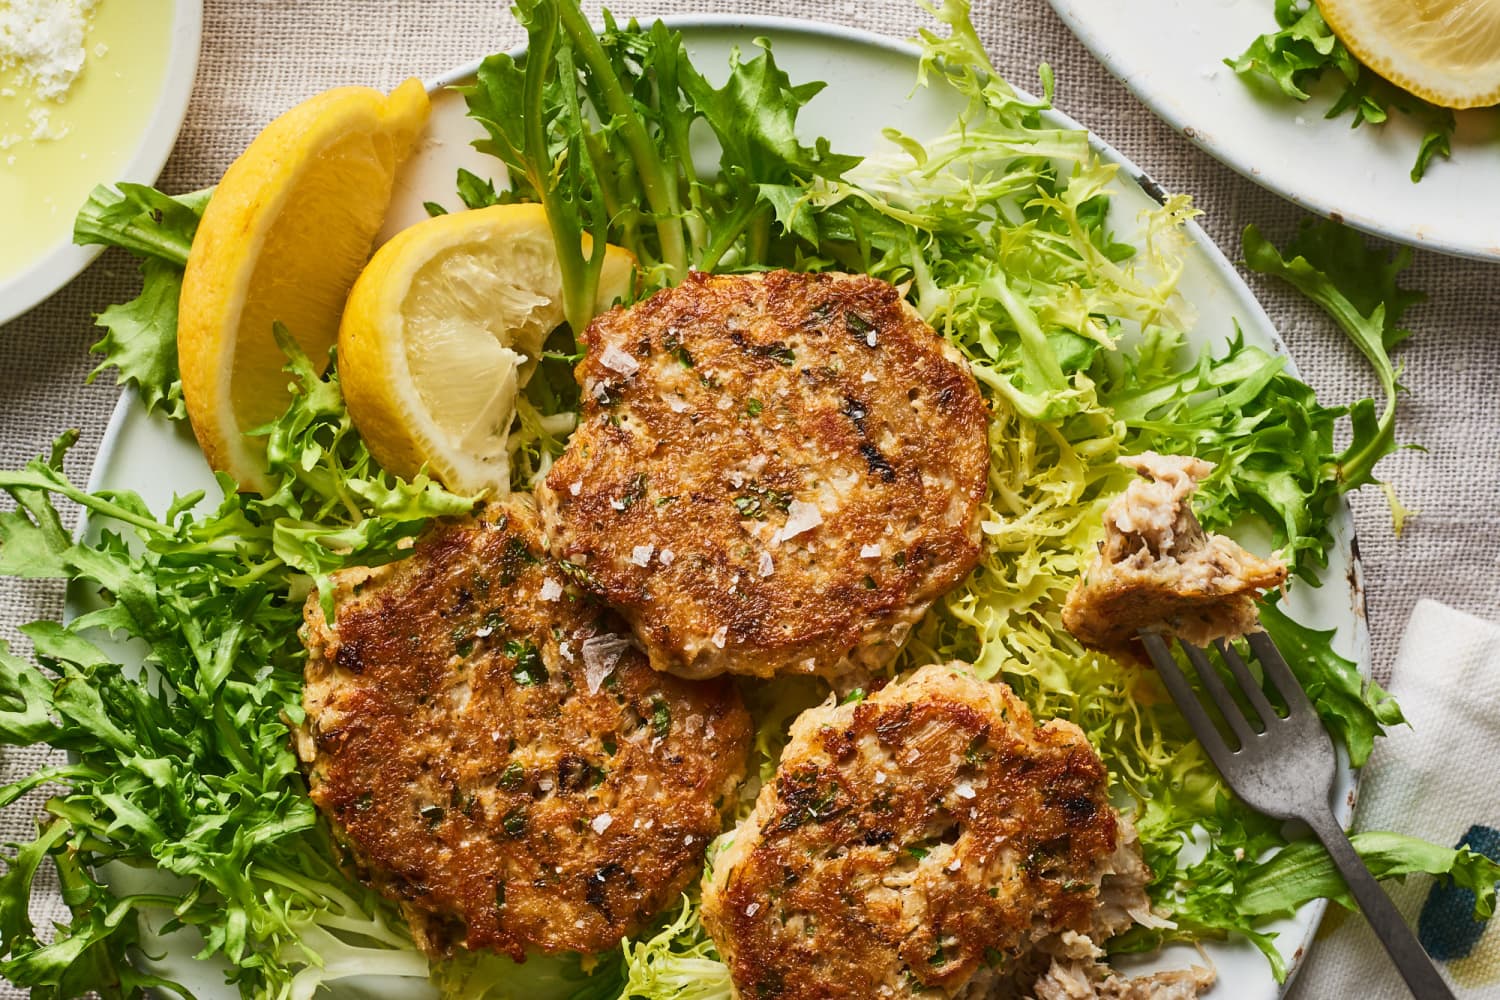 How To Make the Best Crab Cakes | Kitchn